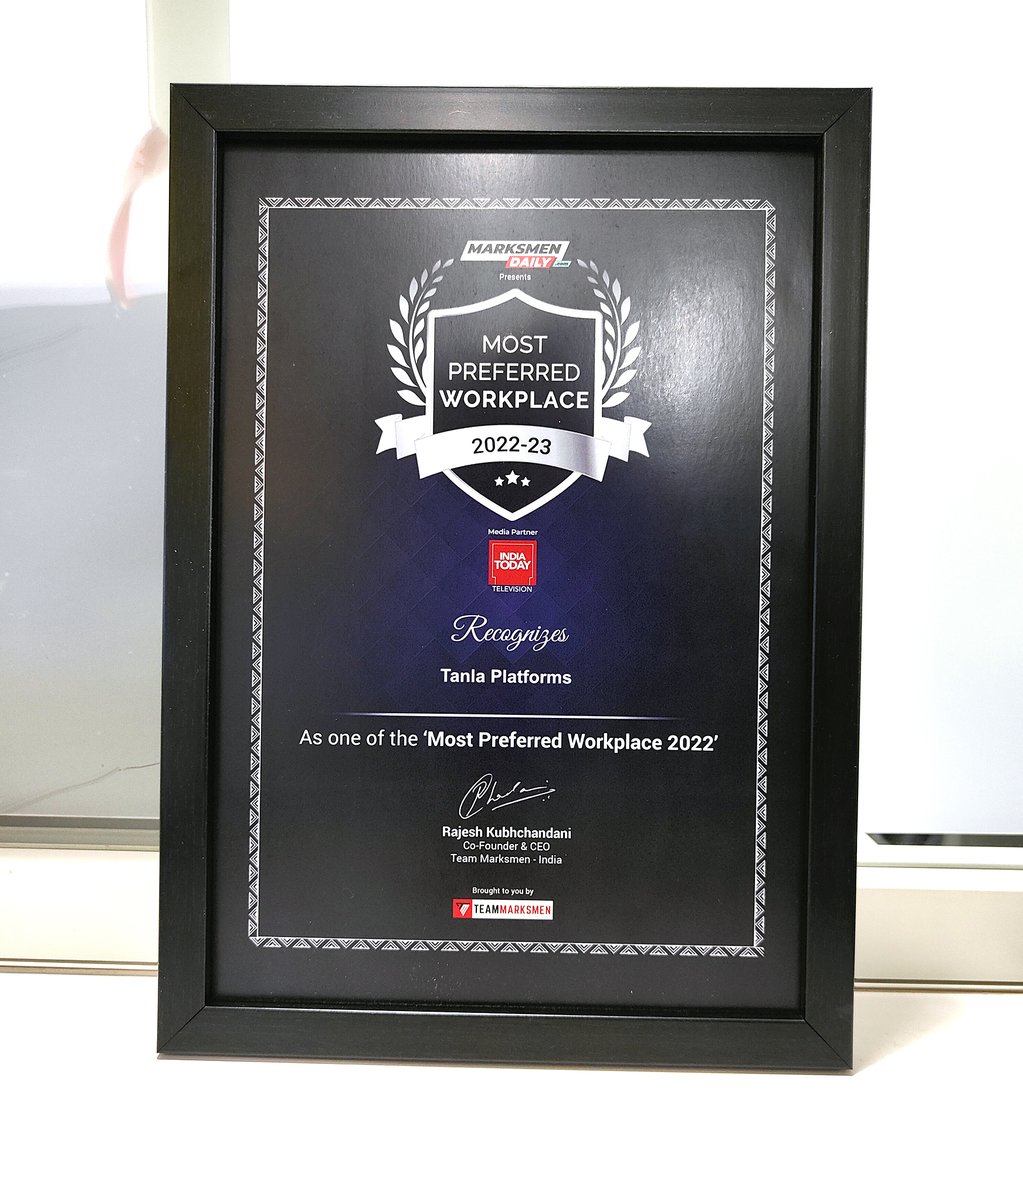 Happy to announce that we have been recognized as the 'Most Preferred Workplace.' Our focus is keeping people at the core of all our policies and values.
Our teams are our greatest asset and will continue making Tanla the most preferred place for exceptional talent.
#Tanla #award